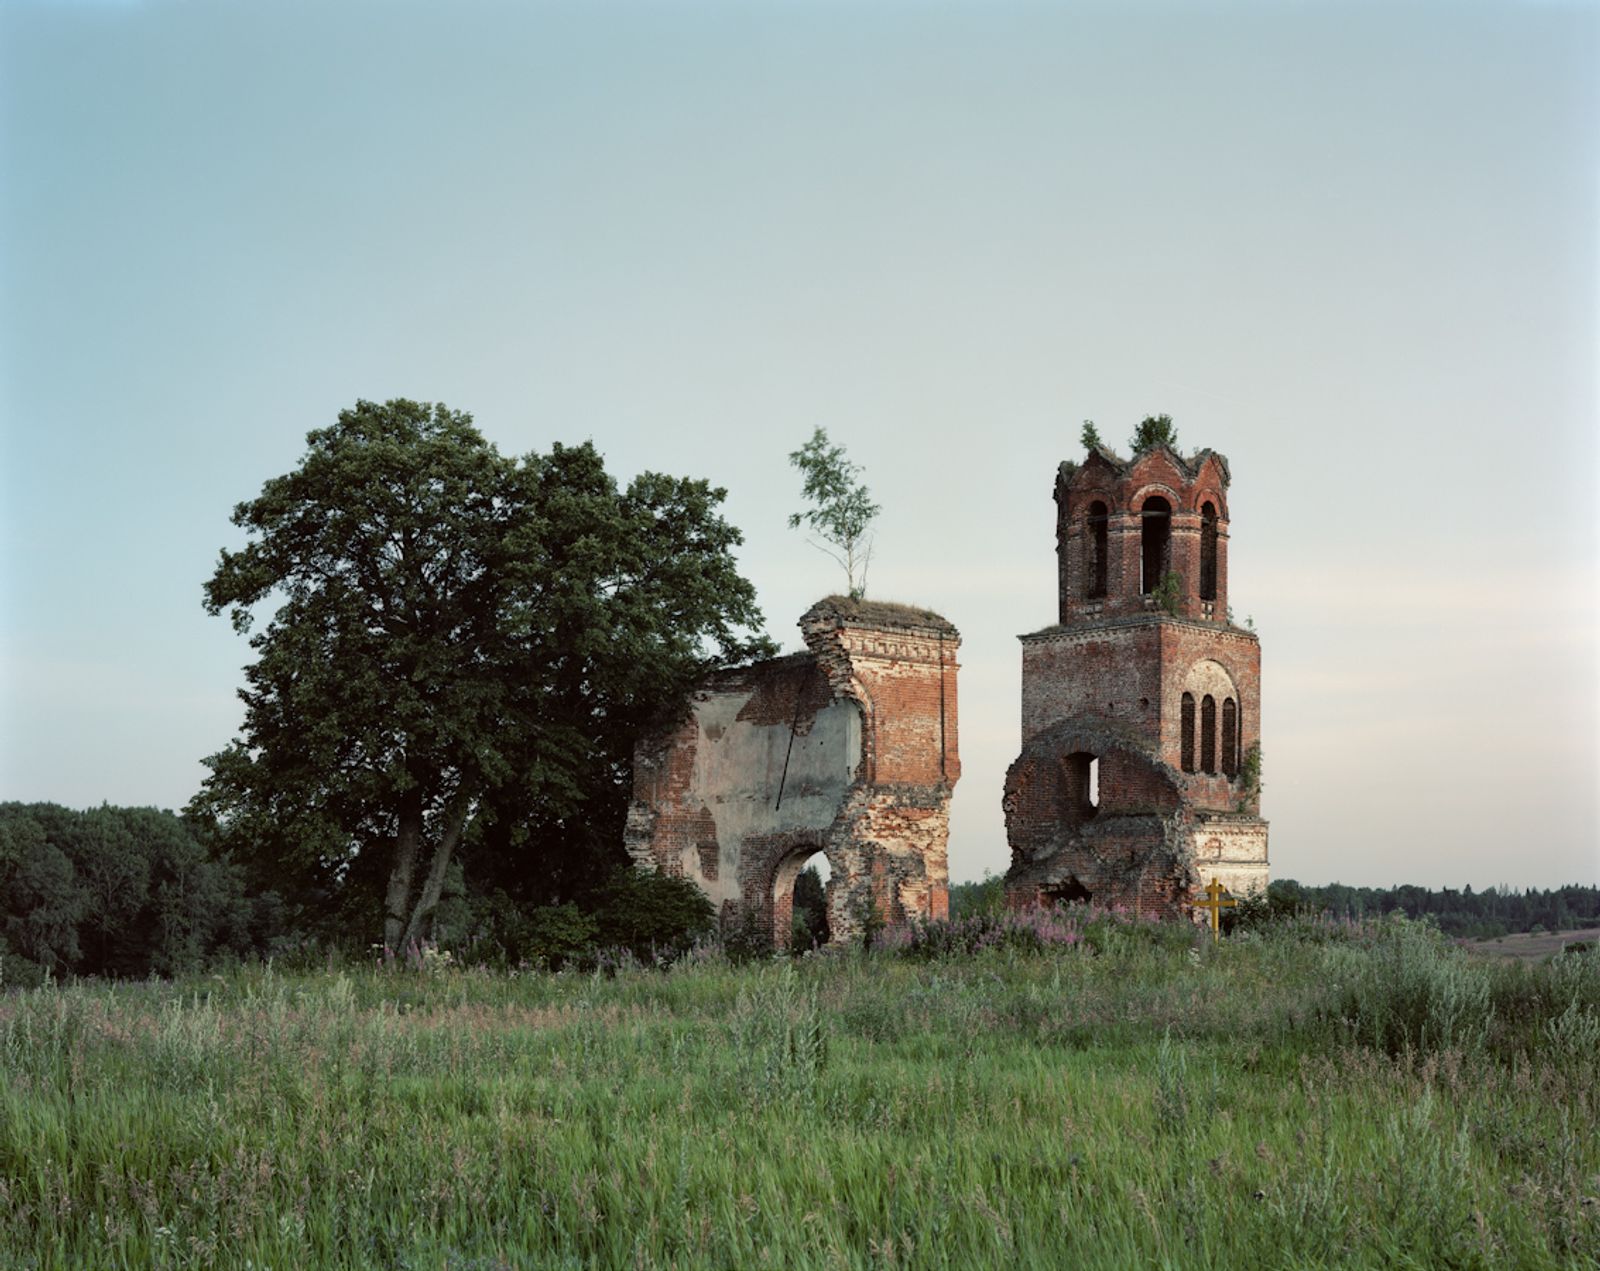 © Petr Antonov - Church of St Nicolas in the village of Likhachevo. The church was built between in 1888 and closed in 1936 or 1937.